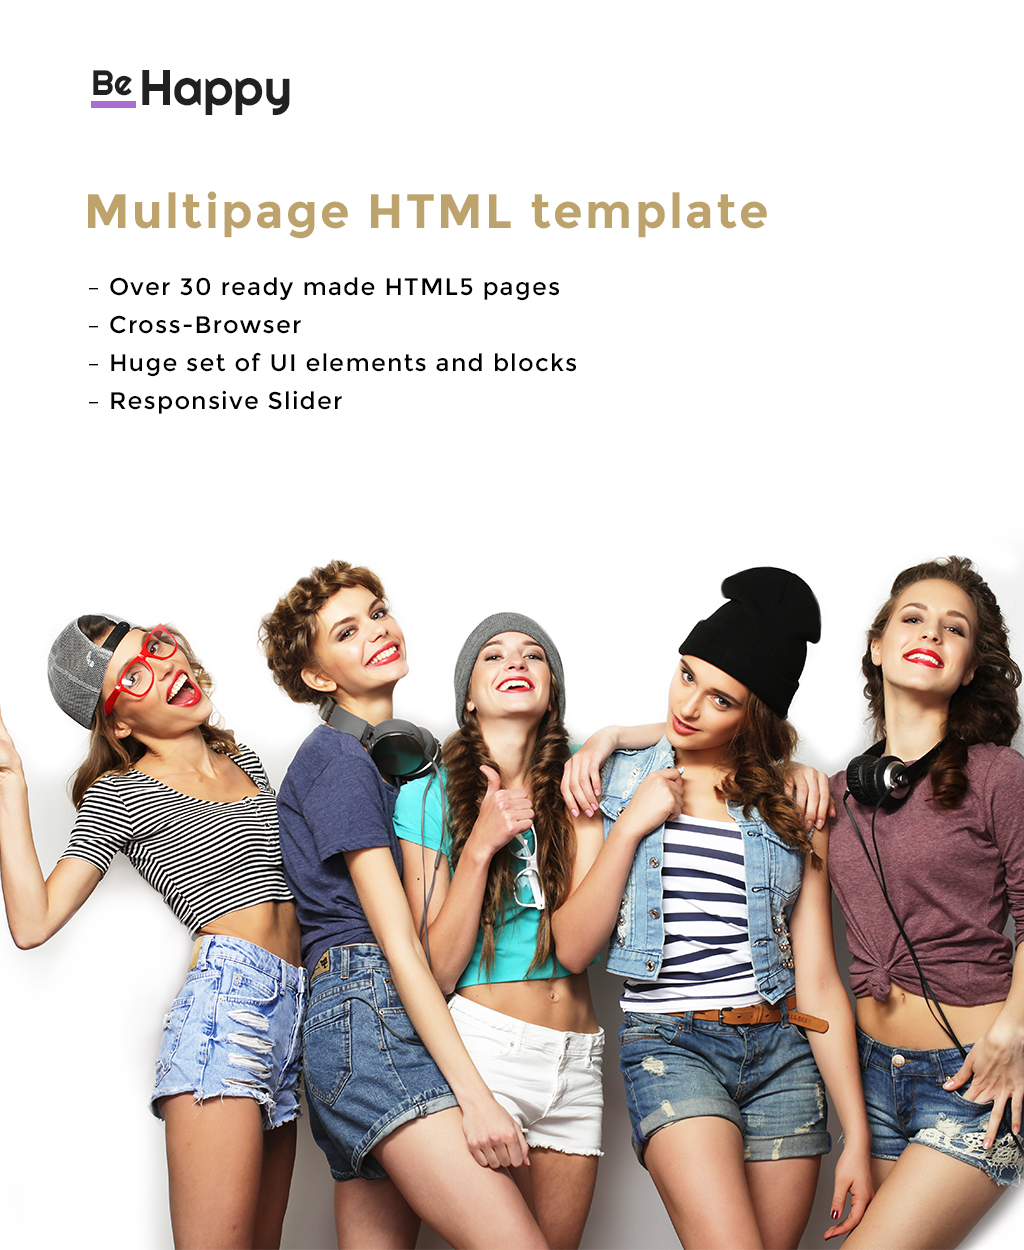 Be Happy - Health Magazine Multipage Website Template